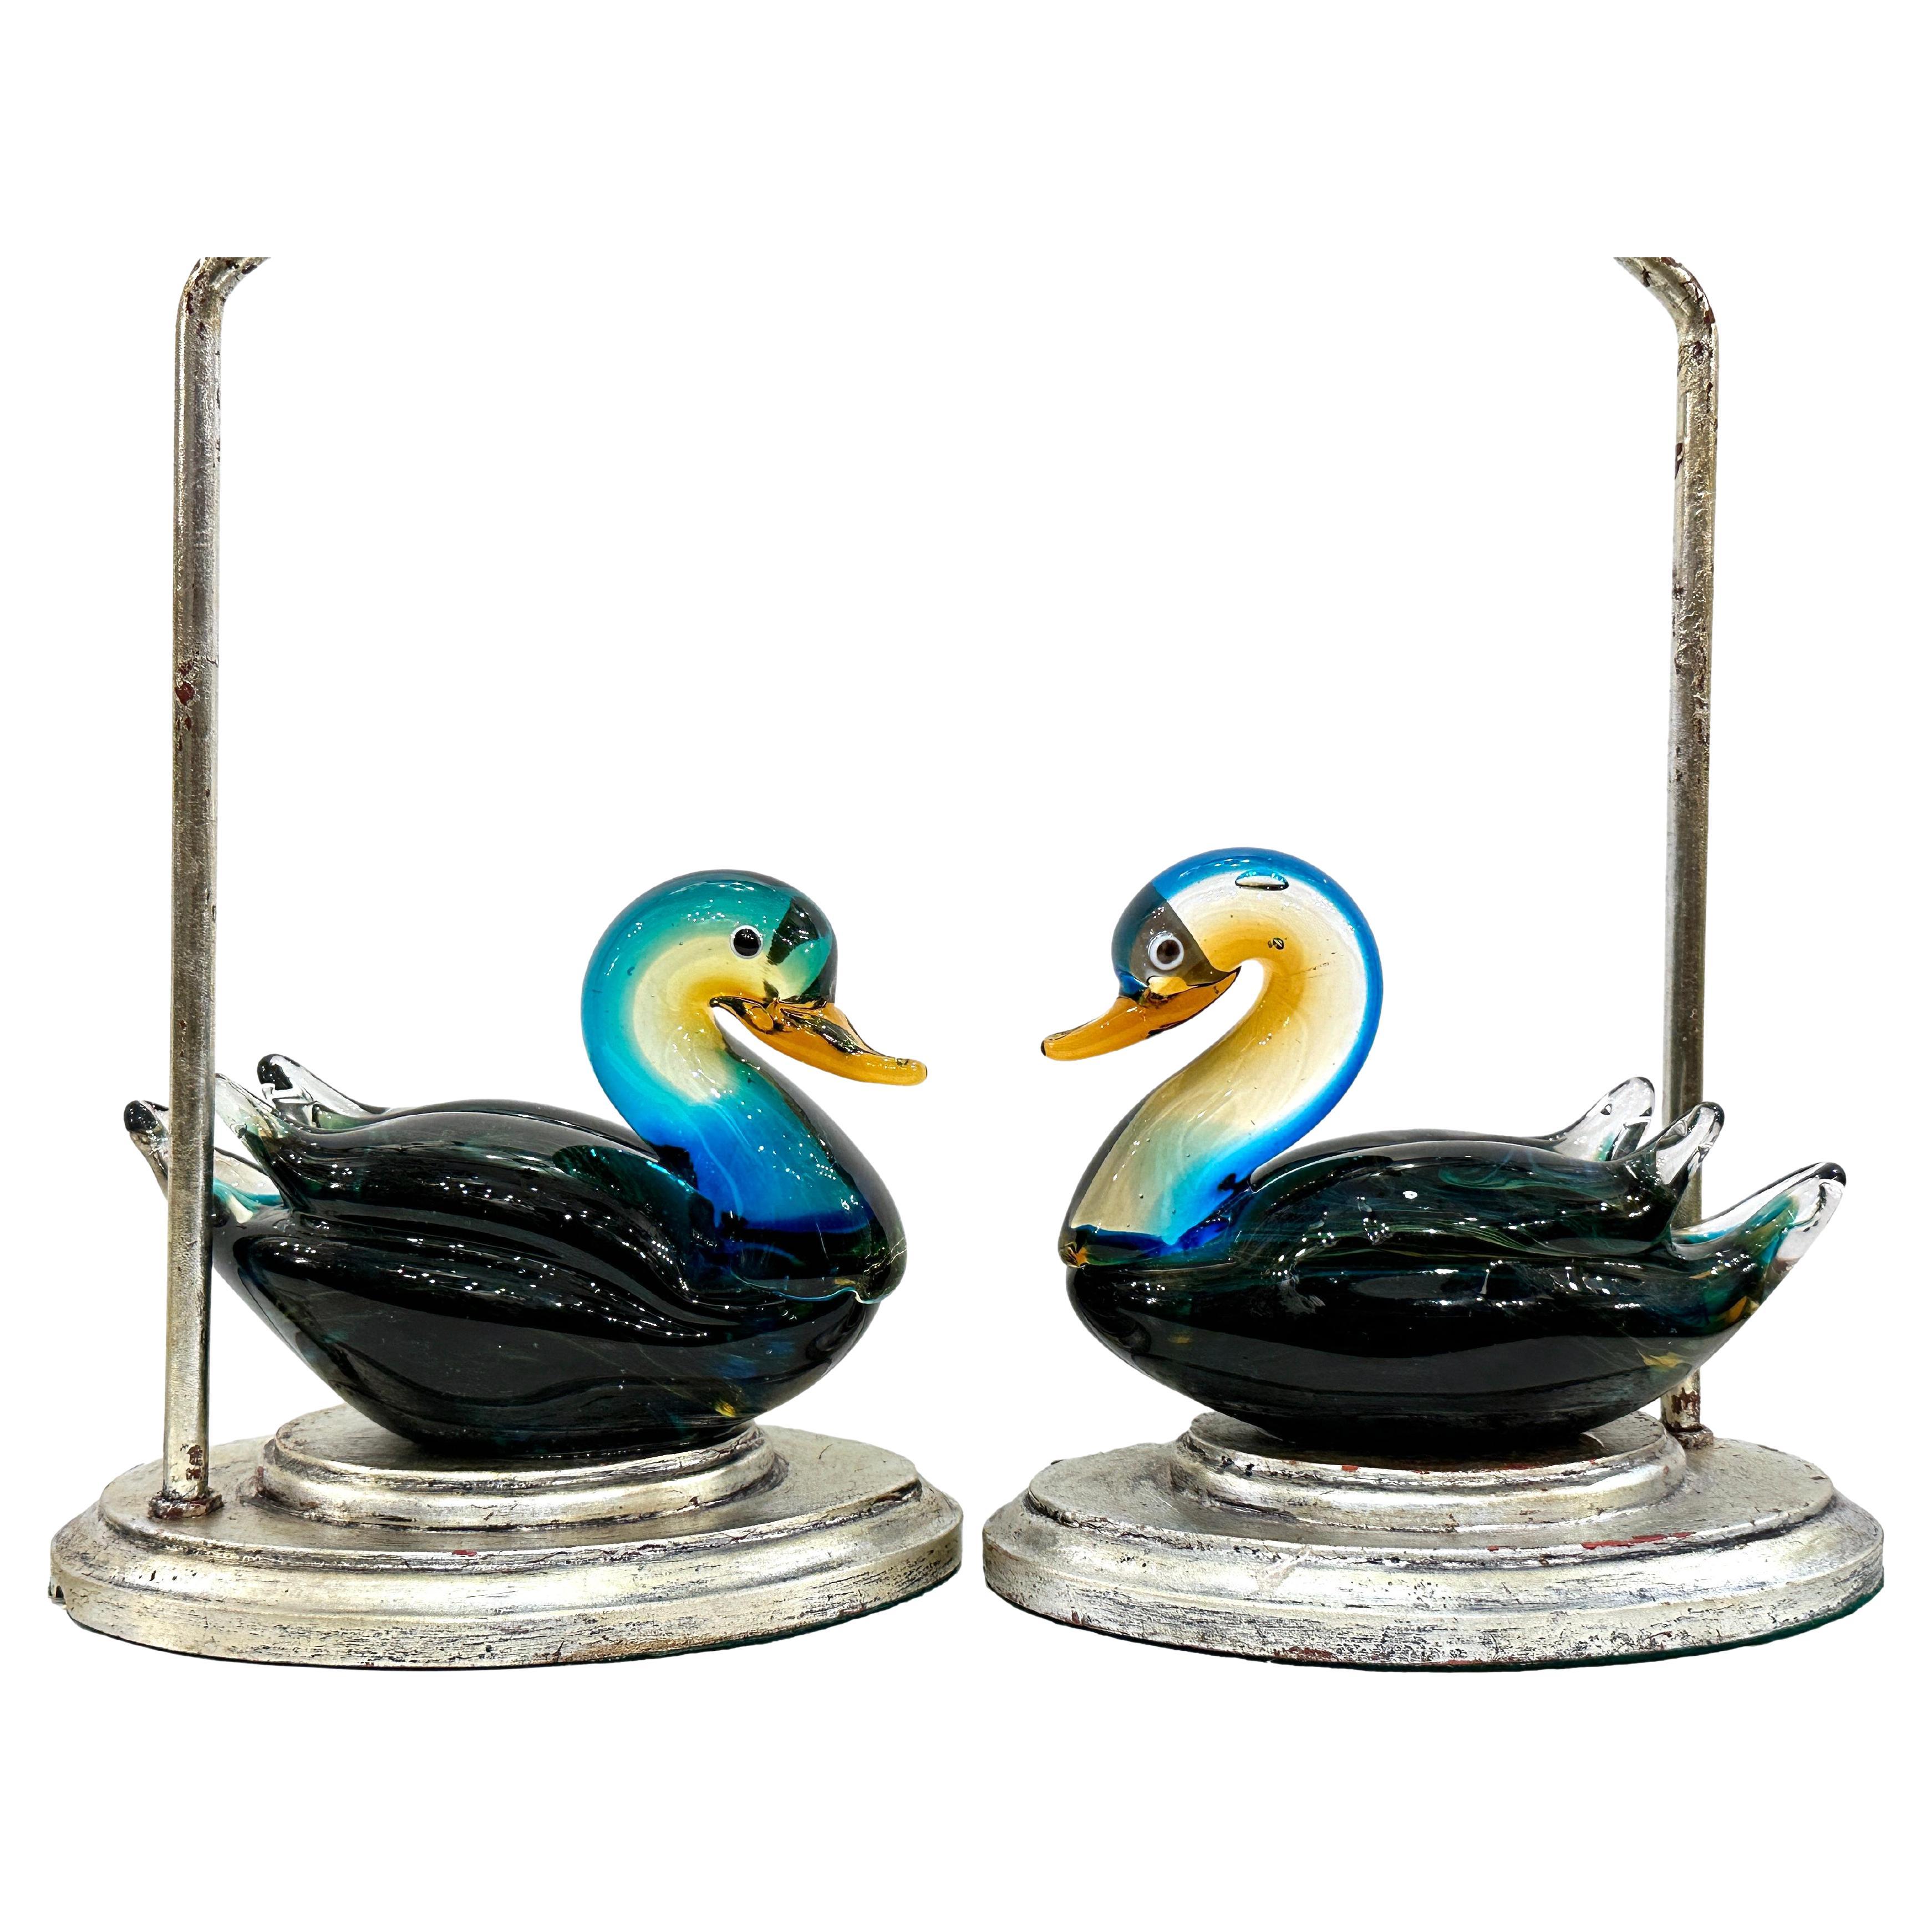 A pair of circa 1950's Italian blown glass ducks mounted as lamps, with silver-leafed bases. 

Measurements:
Height of body: 7